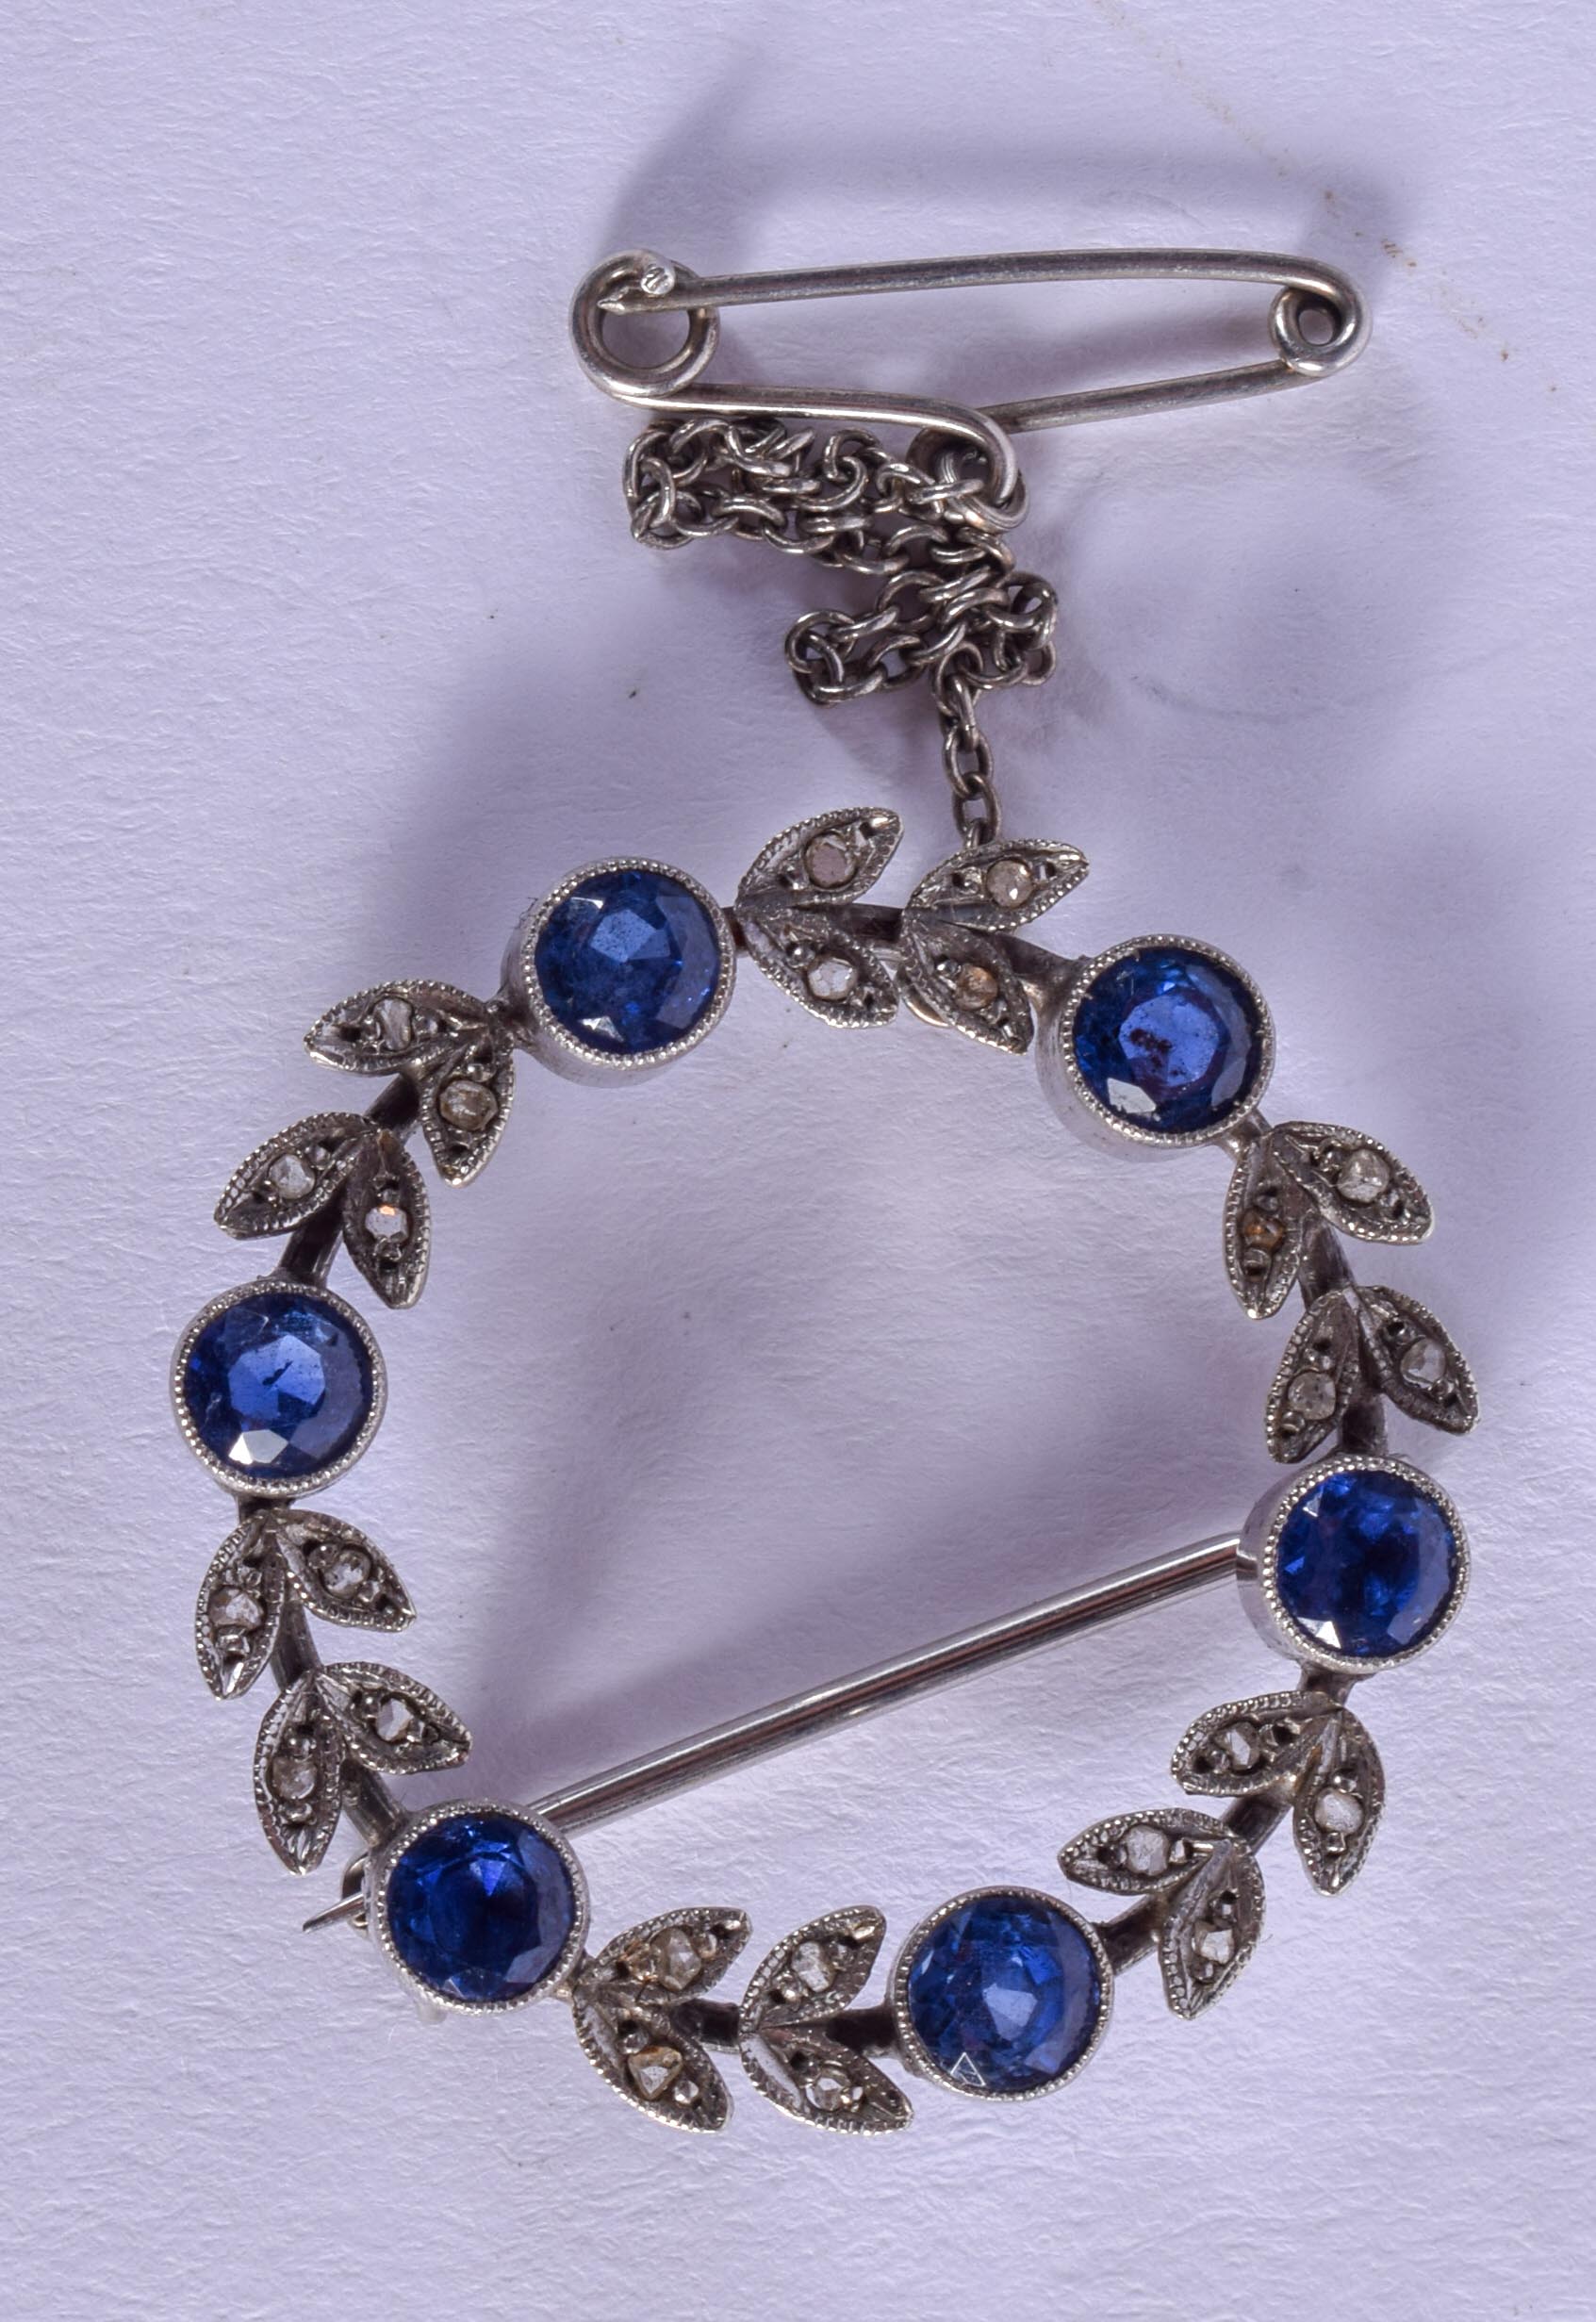 A LOVELY EDWARDIAN WHITE GOLD AND SAPPHIRE BROOCH. 4.5 grams. 2 cm wide.